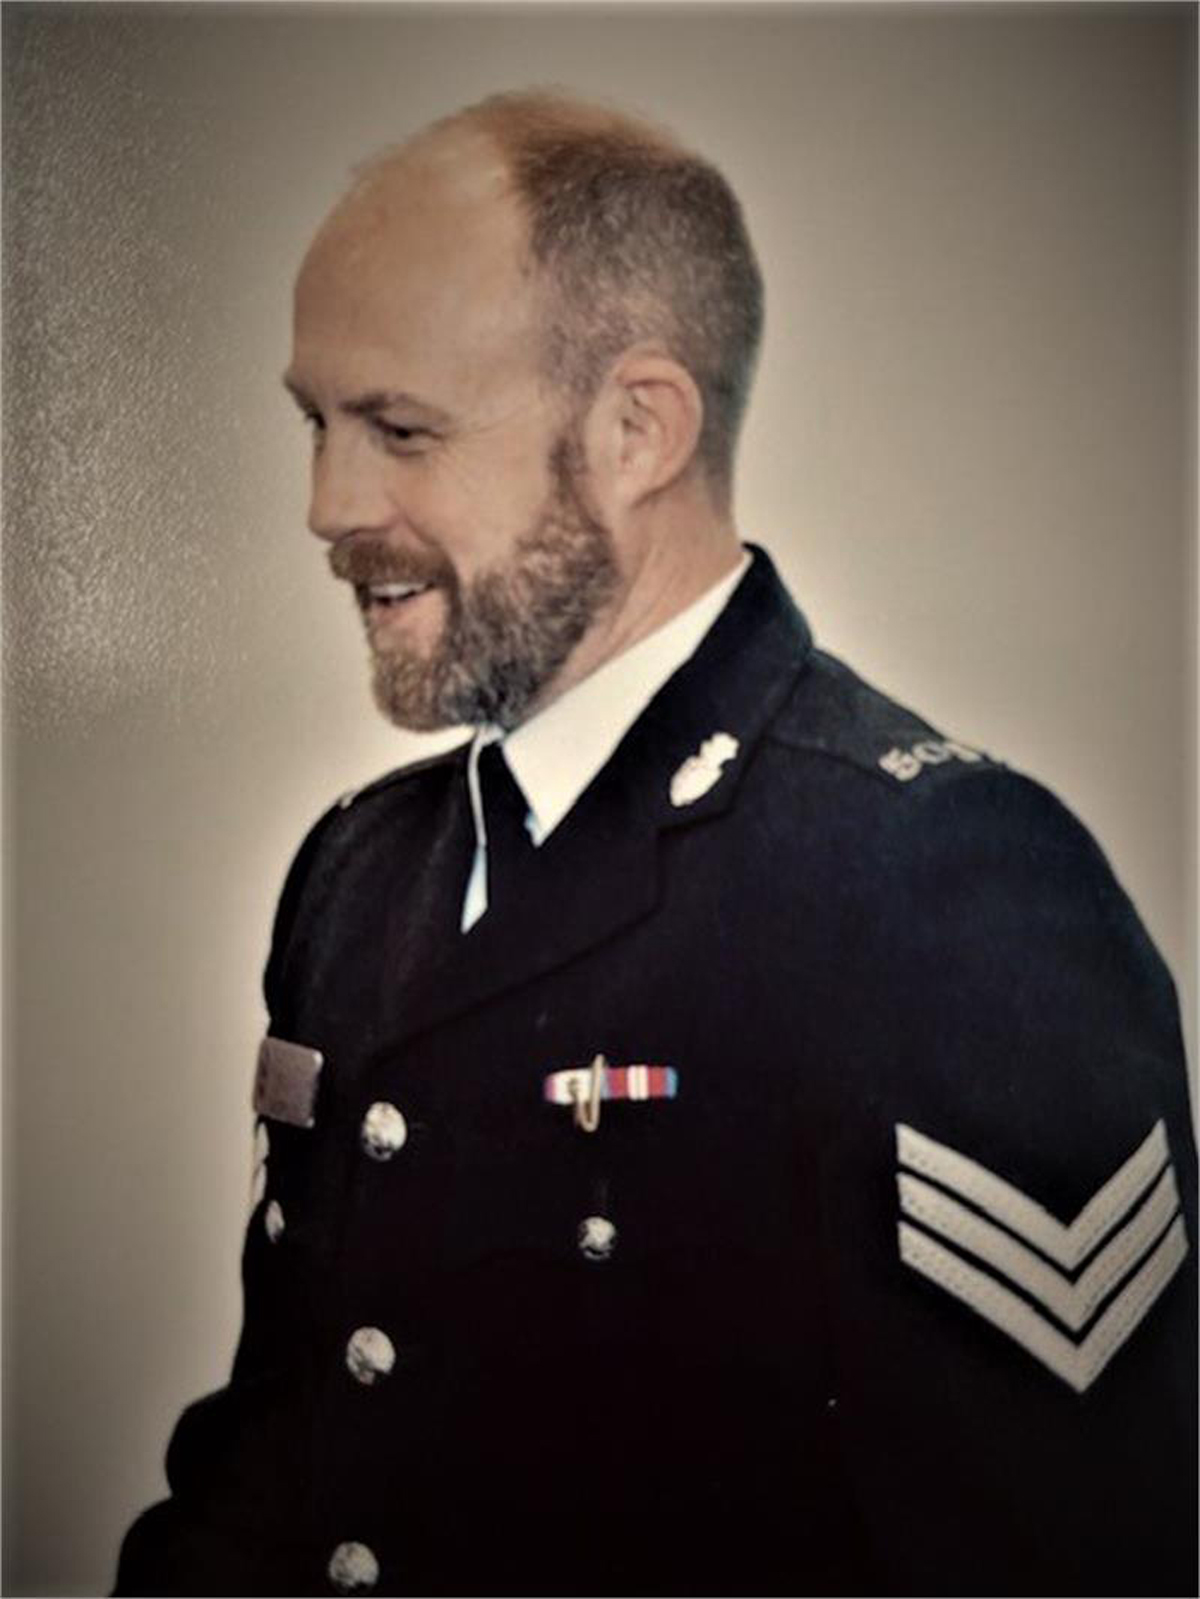 Sgt Alex Howden suffered a borken leg when he was run down by Damien Price at a supermarket car park in Exeter (Devon and Cornwall Police/PA).